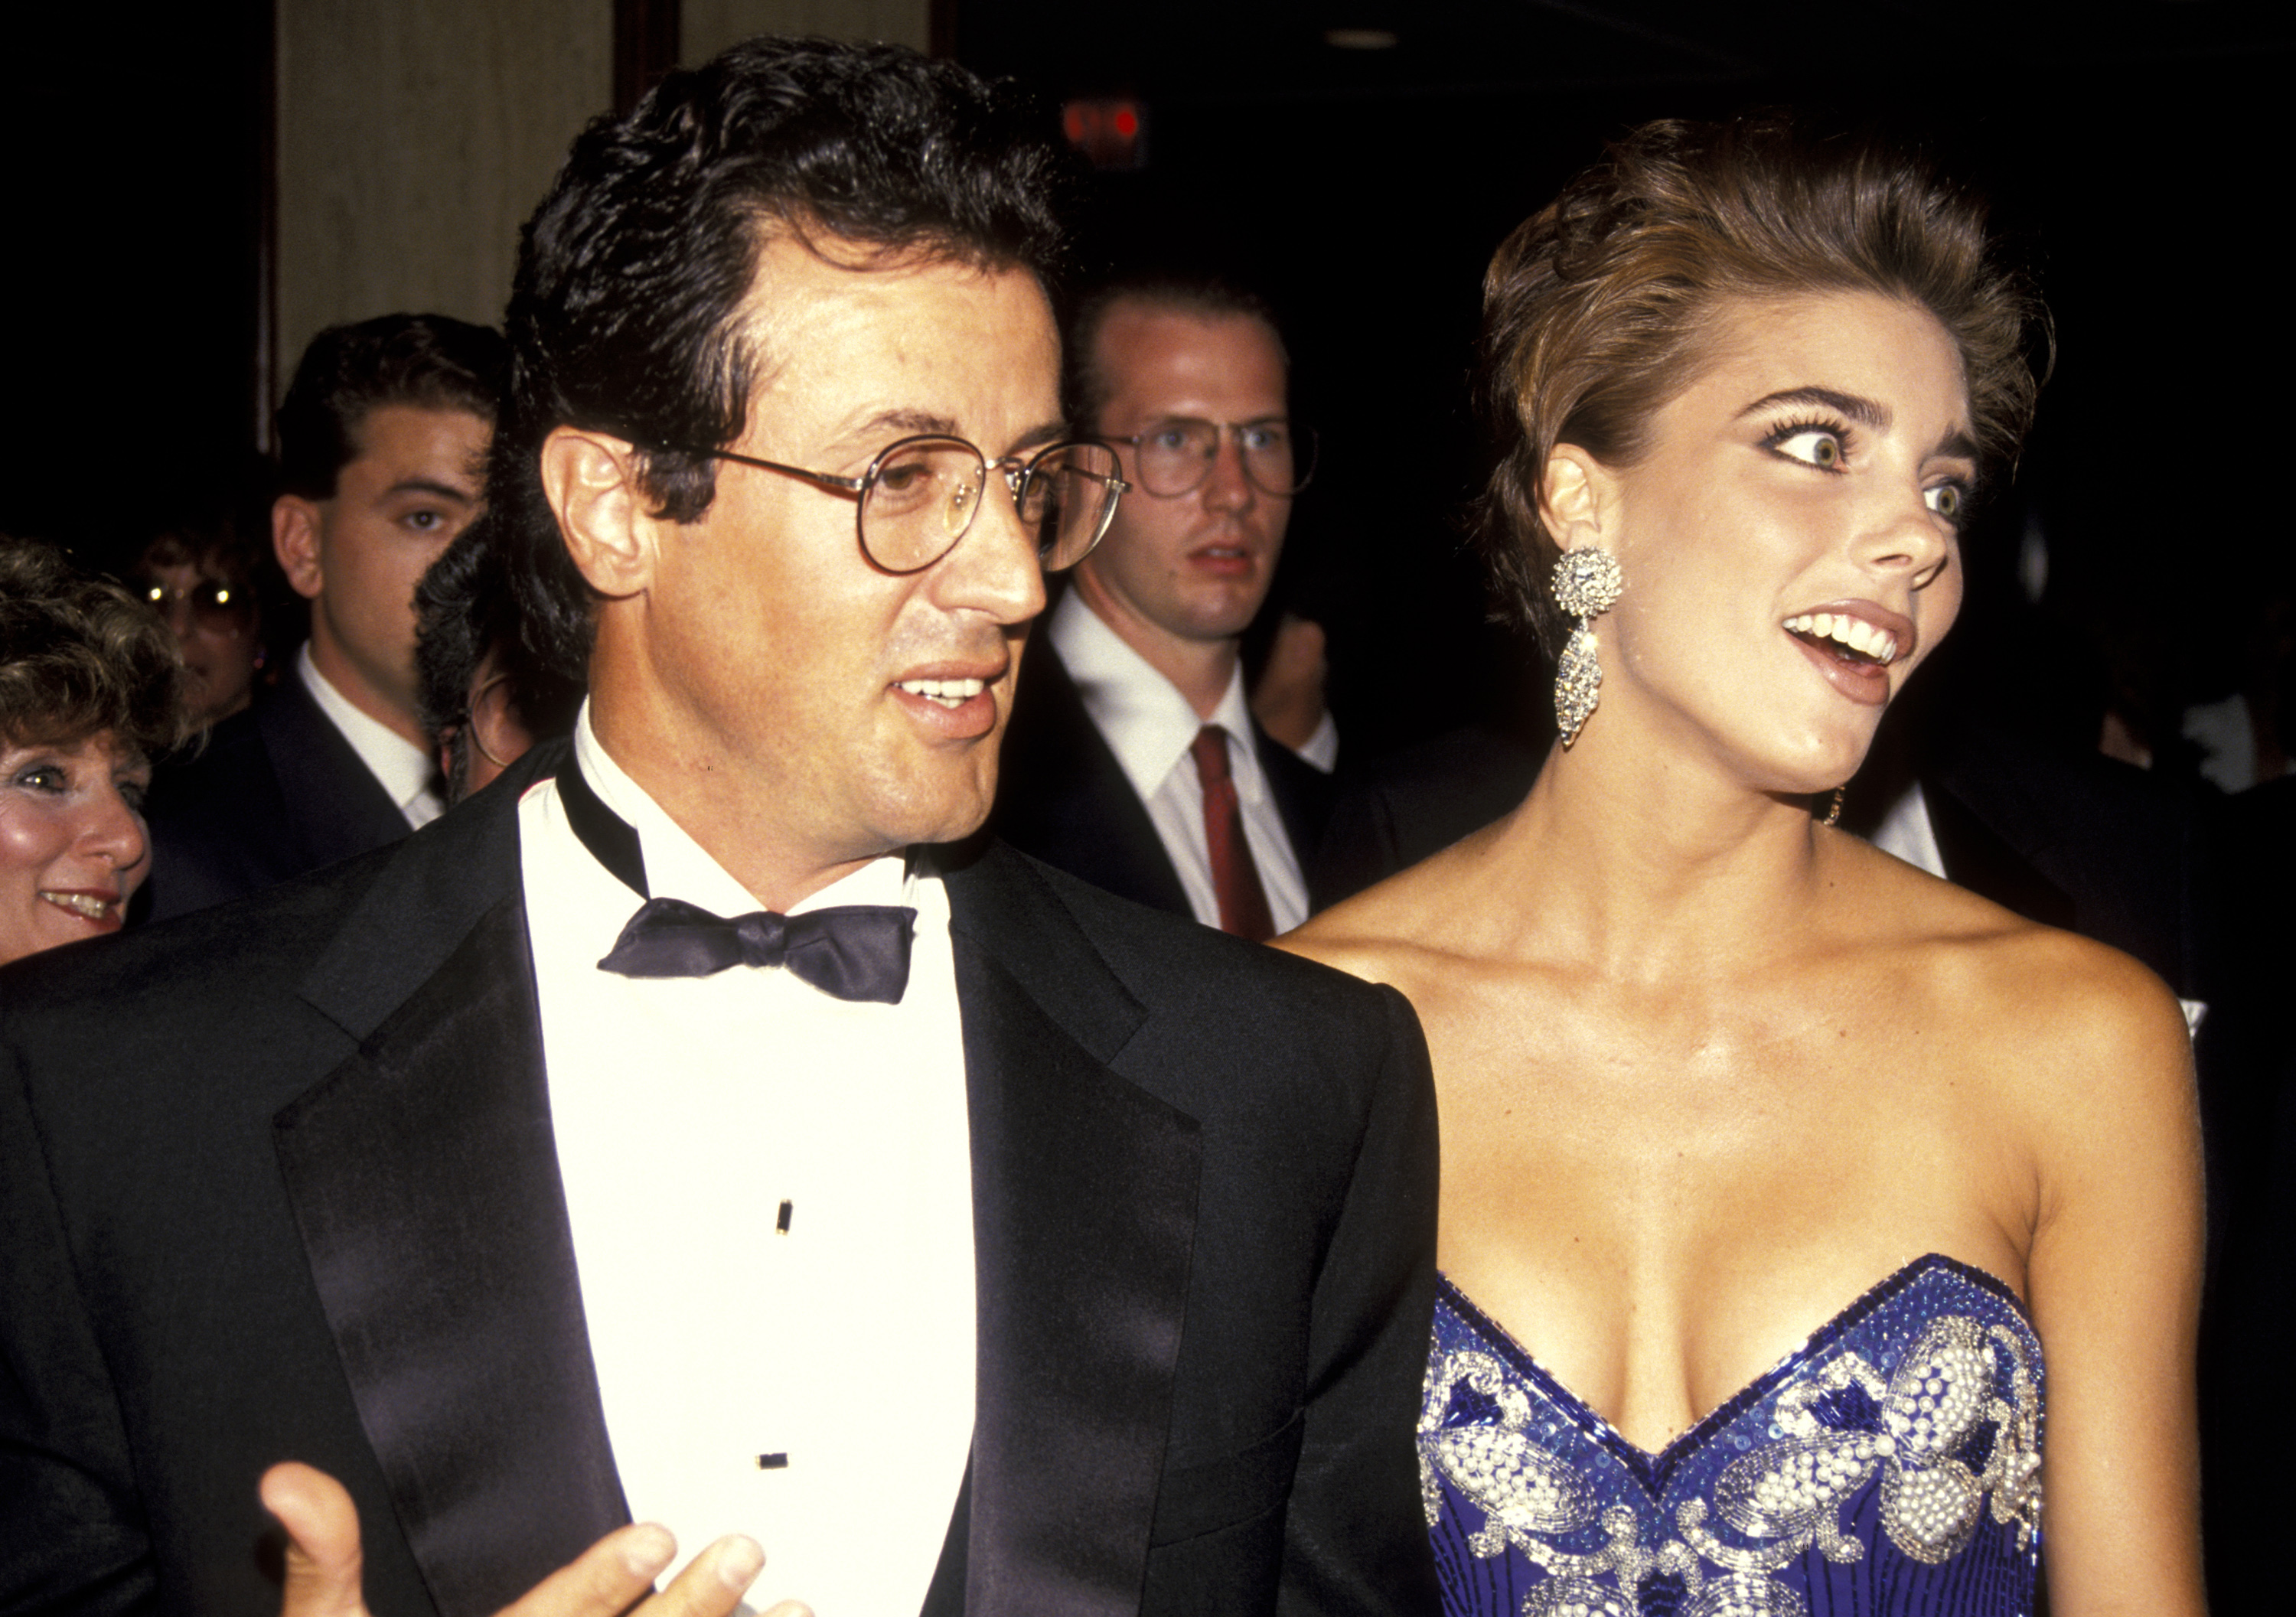 Sylvester Stallone and Jennifer Flavin during the Simon Wiesenthal Center's National Leadership Award Presented to Arnold Schwarzenegger in Los Angeles, California, on June 16, 1991 | Source: Getty Images